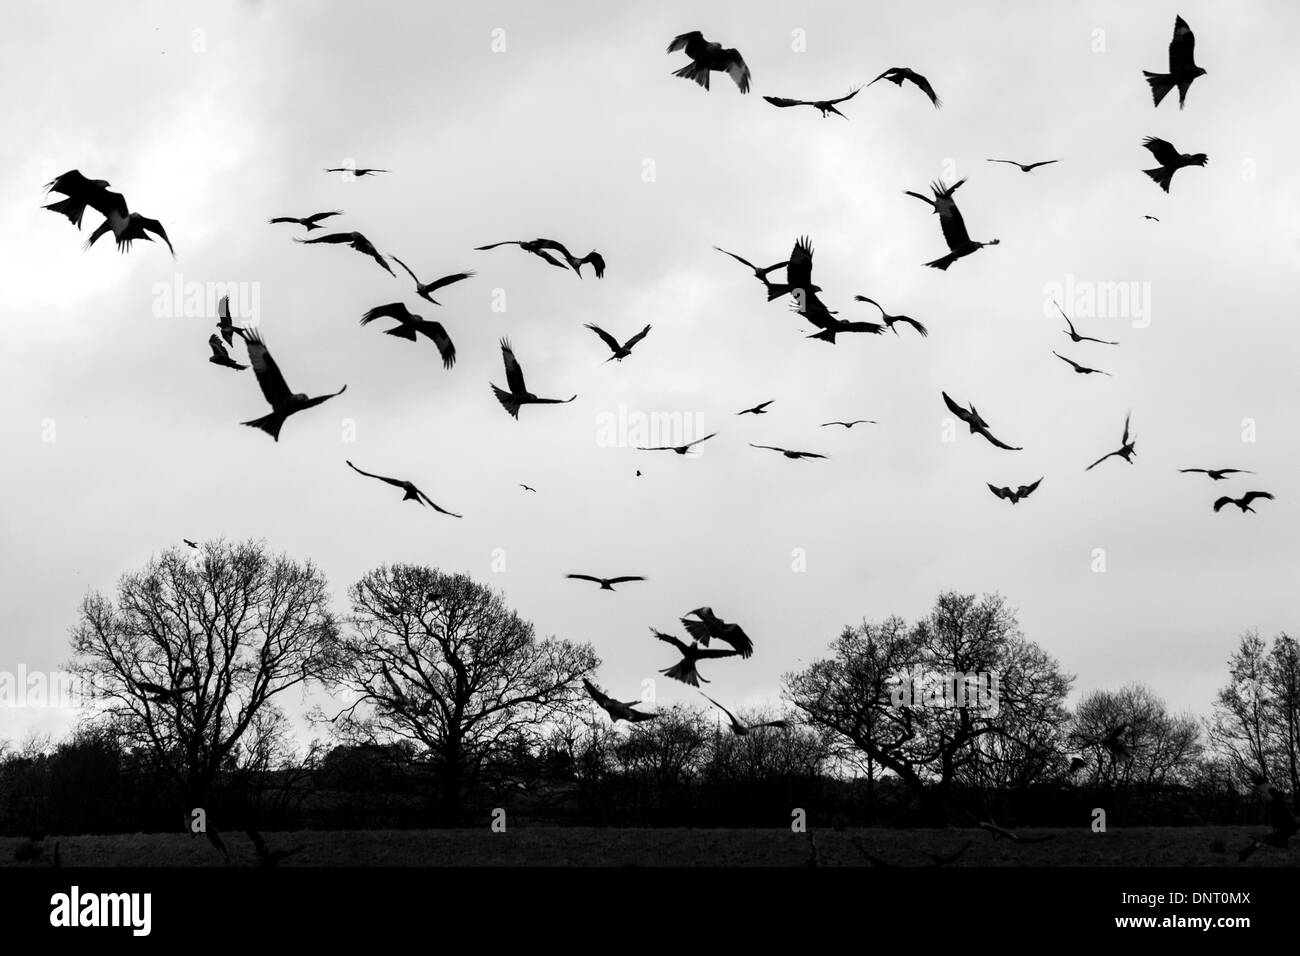 Red Kite (Milvus milvus) feeding frenzy captured in black and white at red kite feeding station in Rhayader, Mid Wales Stock Photo